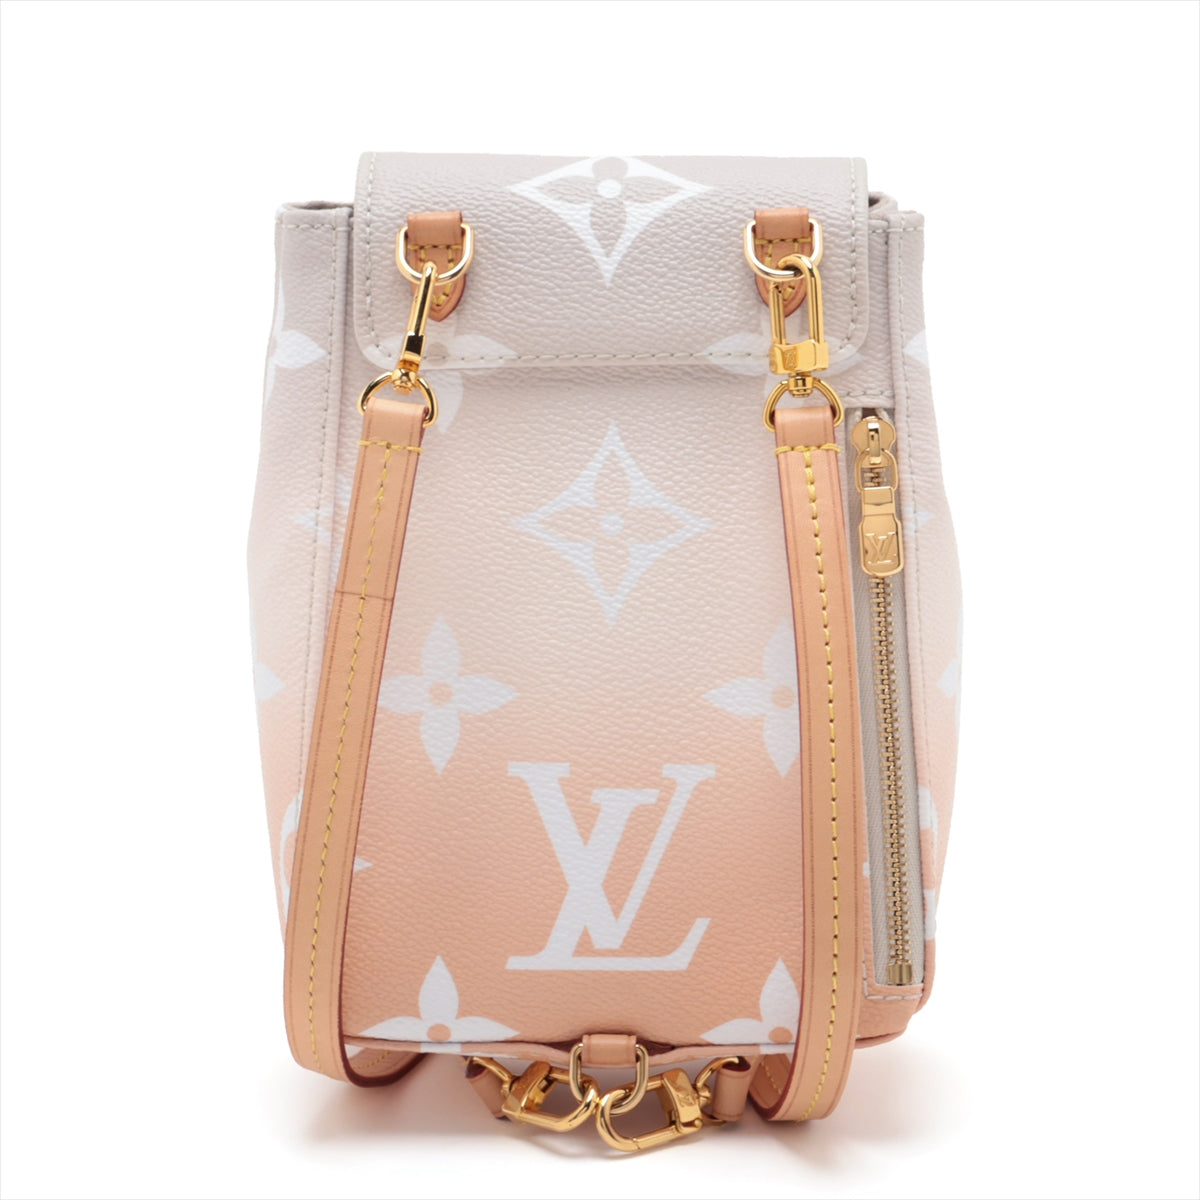 Louis Vuitton Monogram canvas Tiny backpack M45764 There was an RFID response